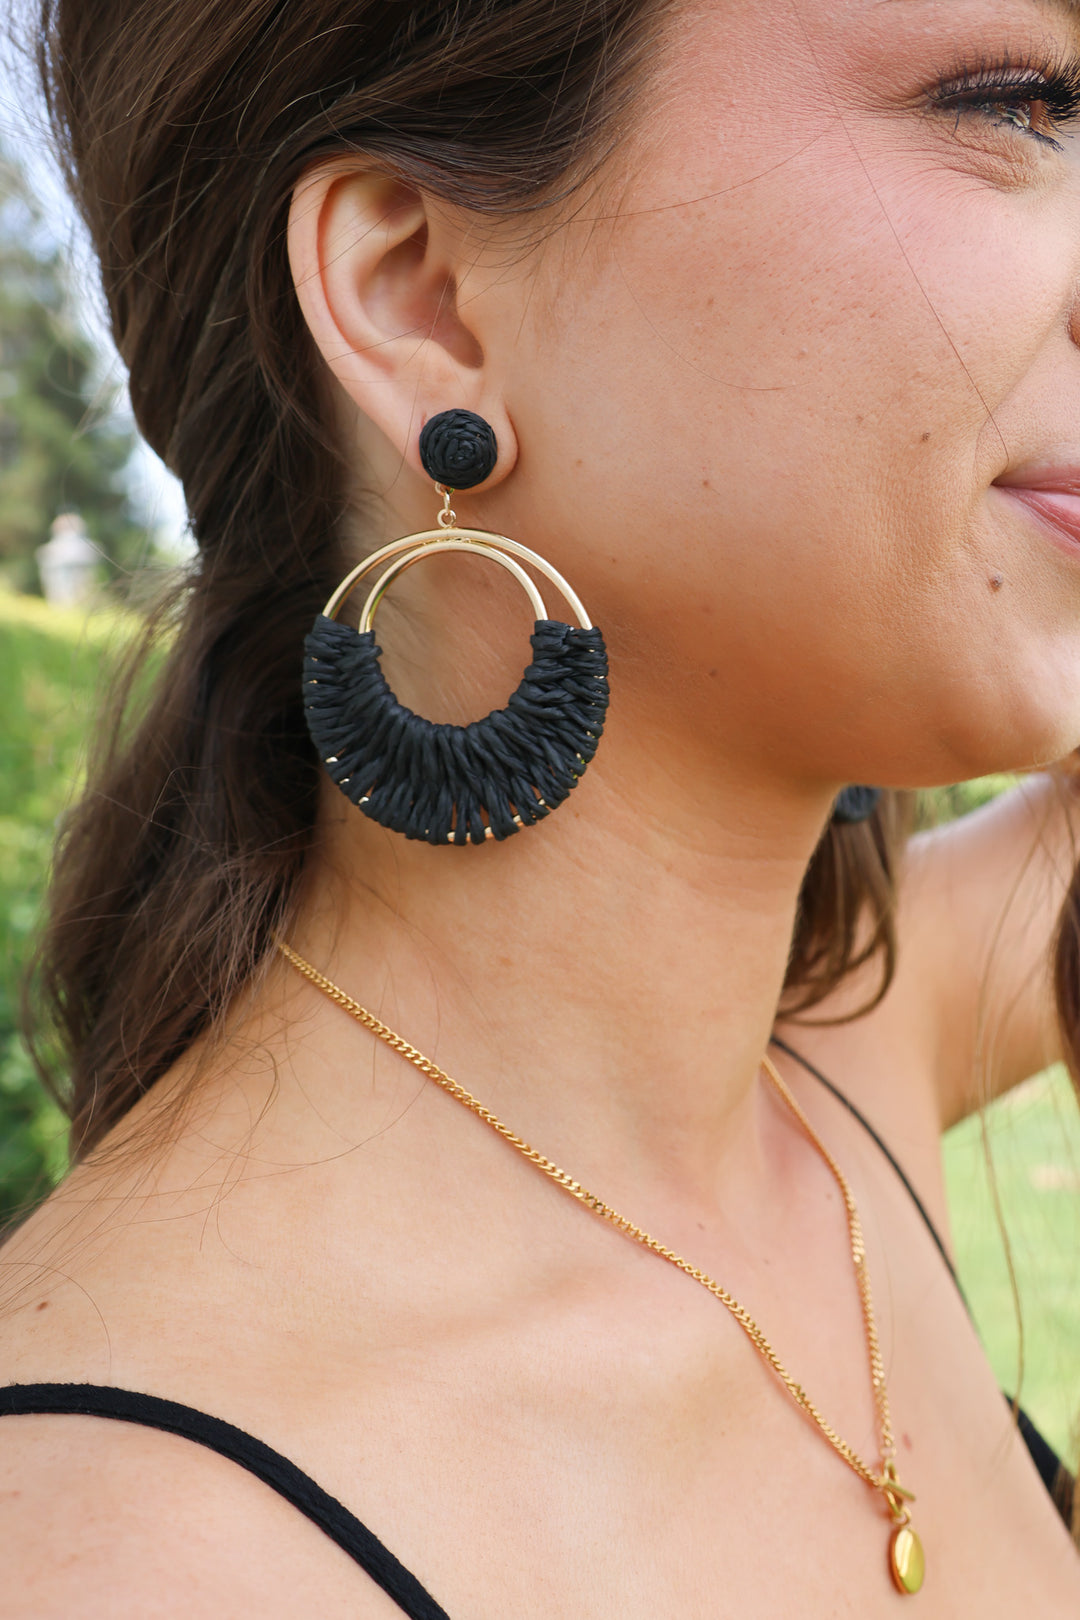 Cabana Day Earring in Black - ShopSpoiled